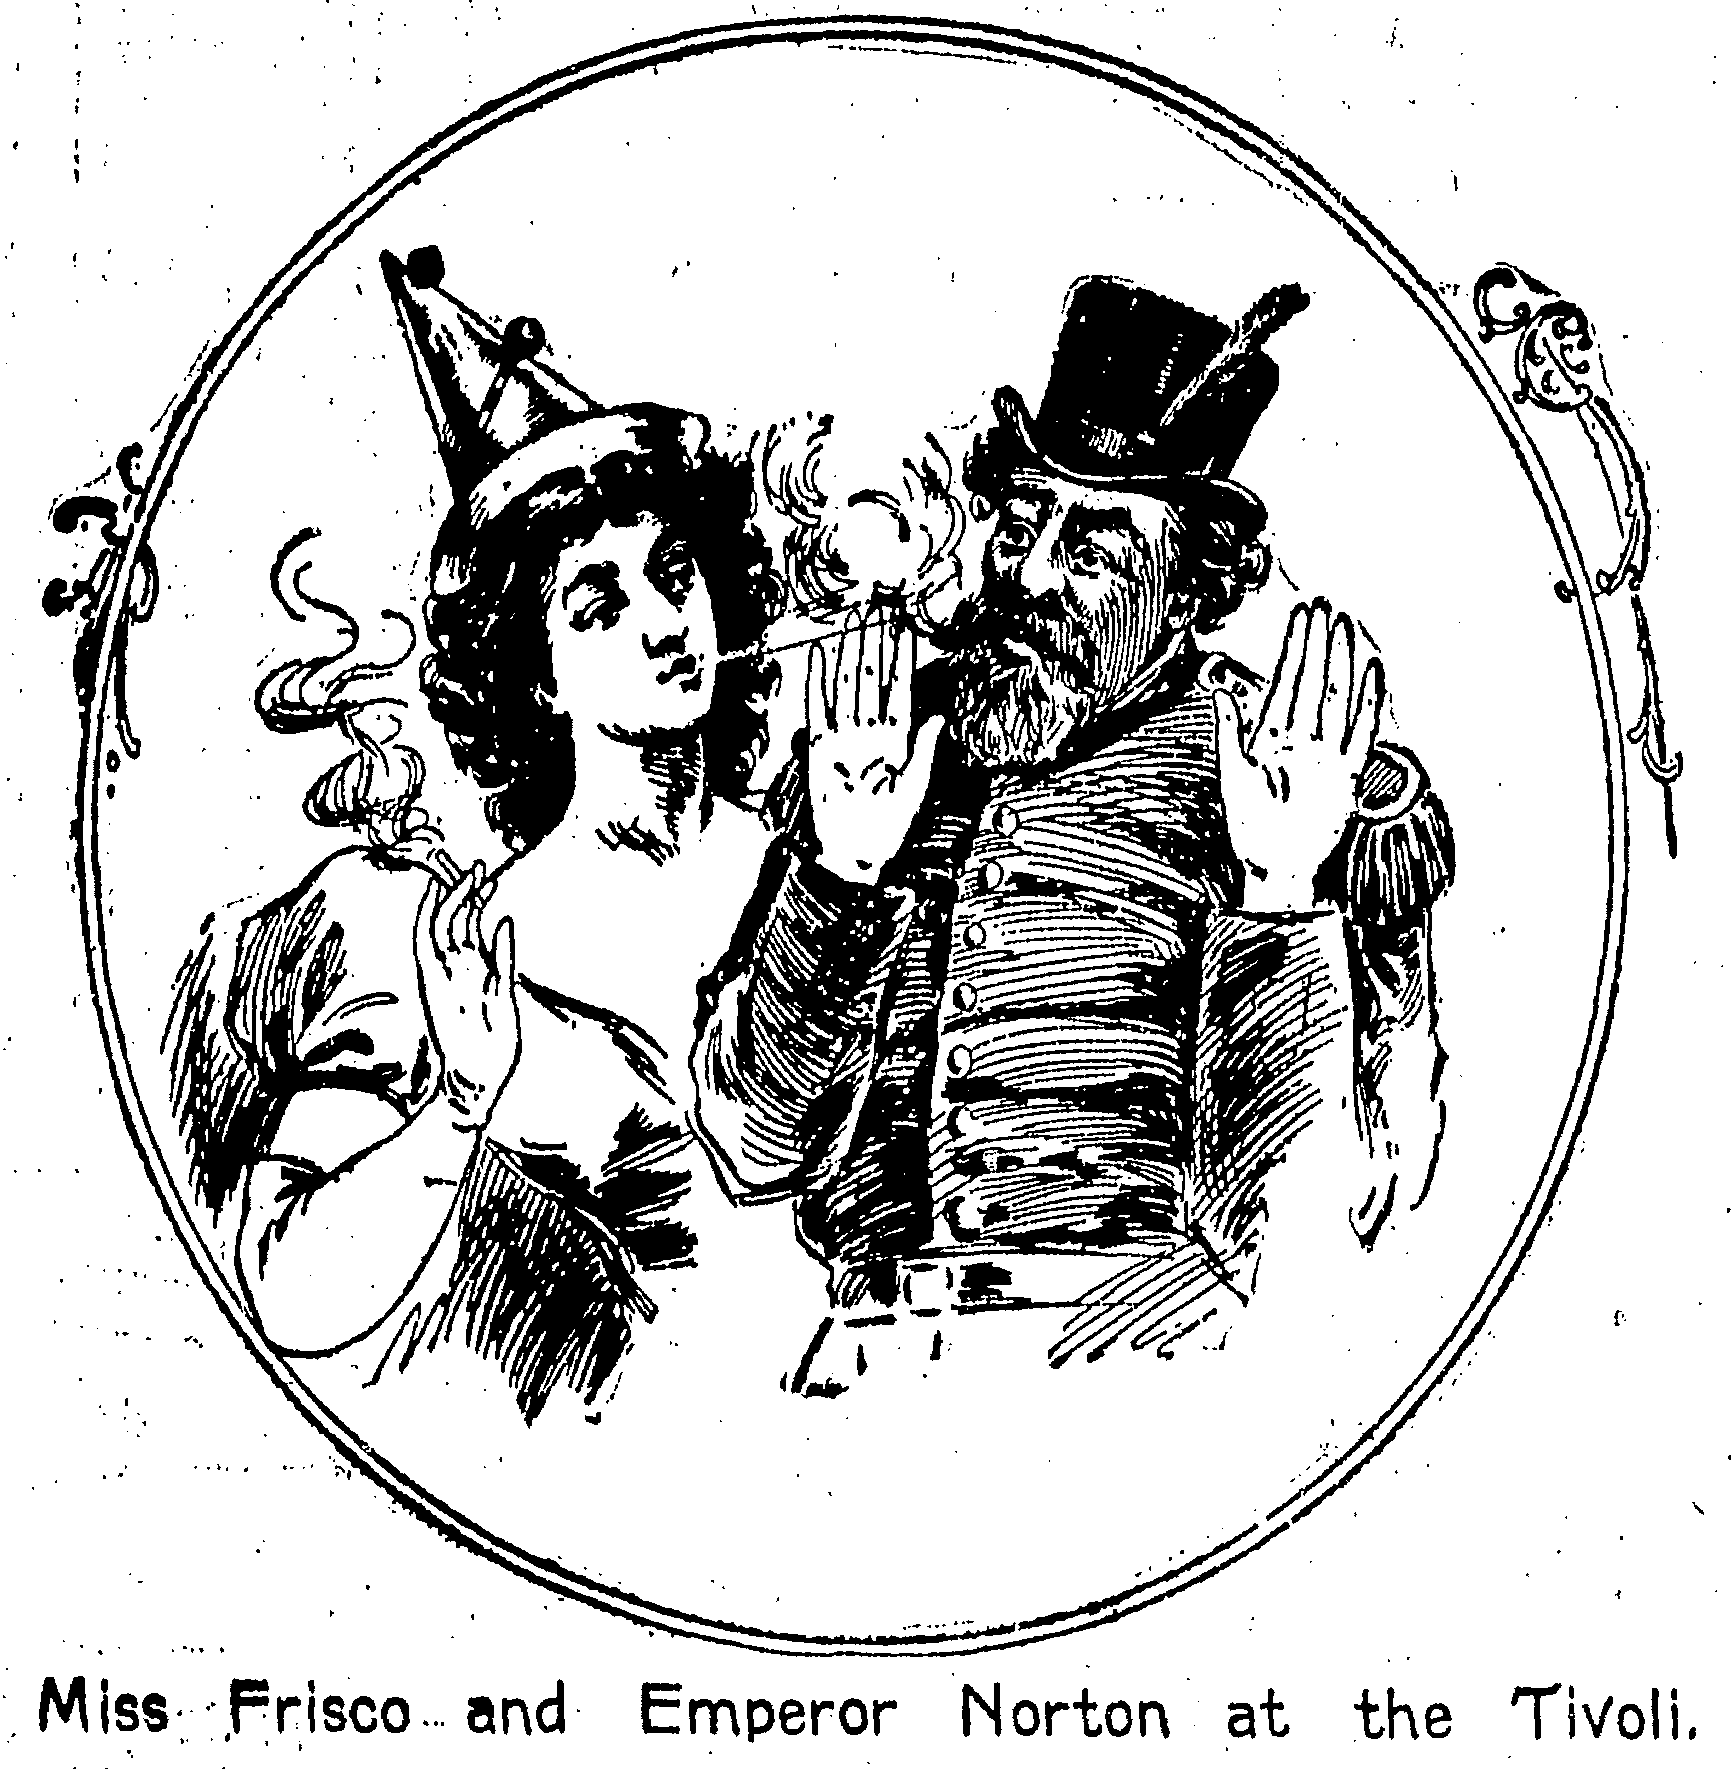   Illustration for item previewing musical revue,  Miss Frisco , opening at the Tivoli Opera House.   San Francisco Chronicle , 6 June 1897, p. 5. Source: Genealogy Bank. [Added 12.18.2022] 